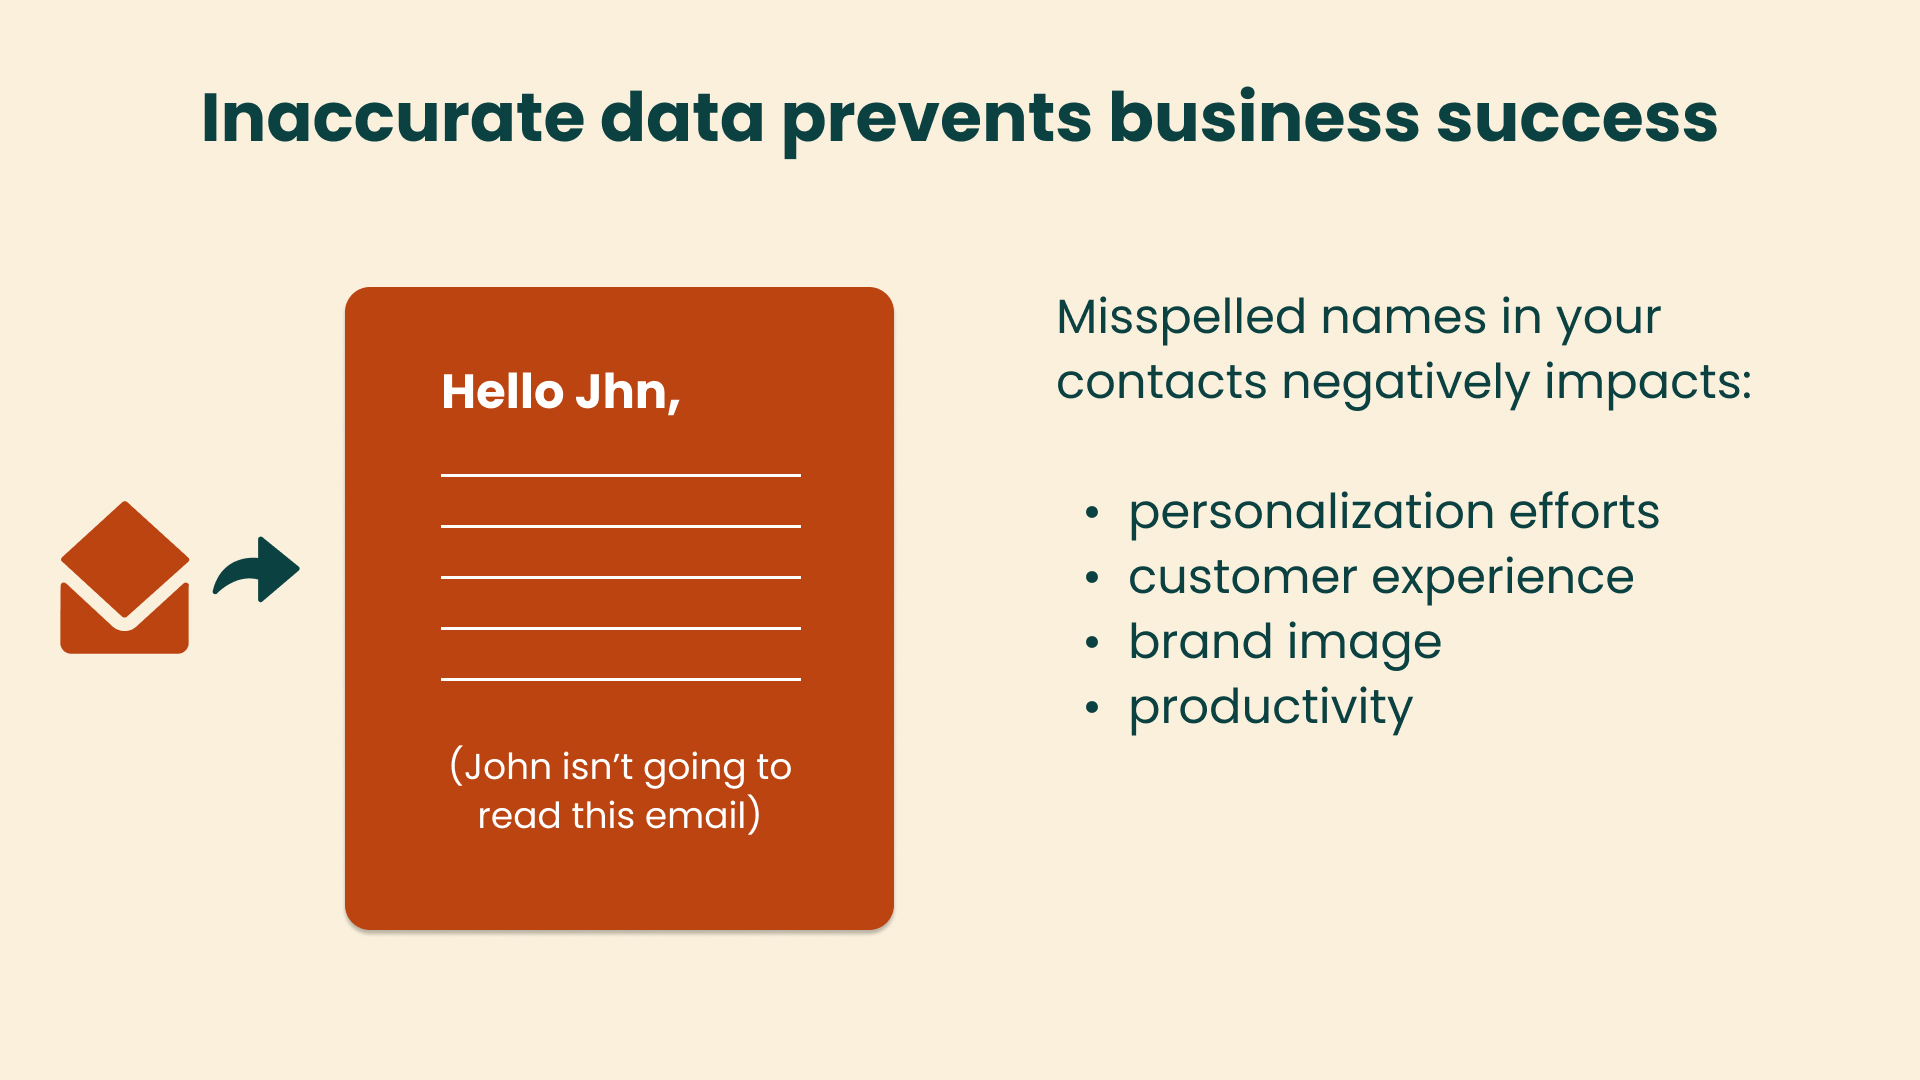 Business success is hindered by incorrect data in your Contact records as the bad data will negatively impact your personalization efforts, productivity, customer experience and brand image.